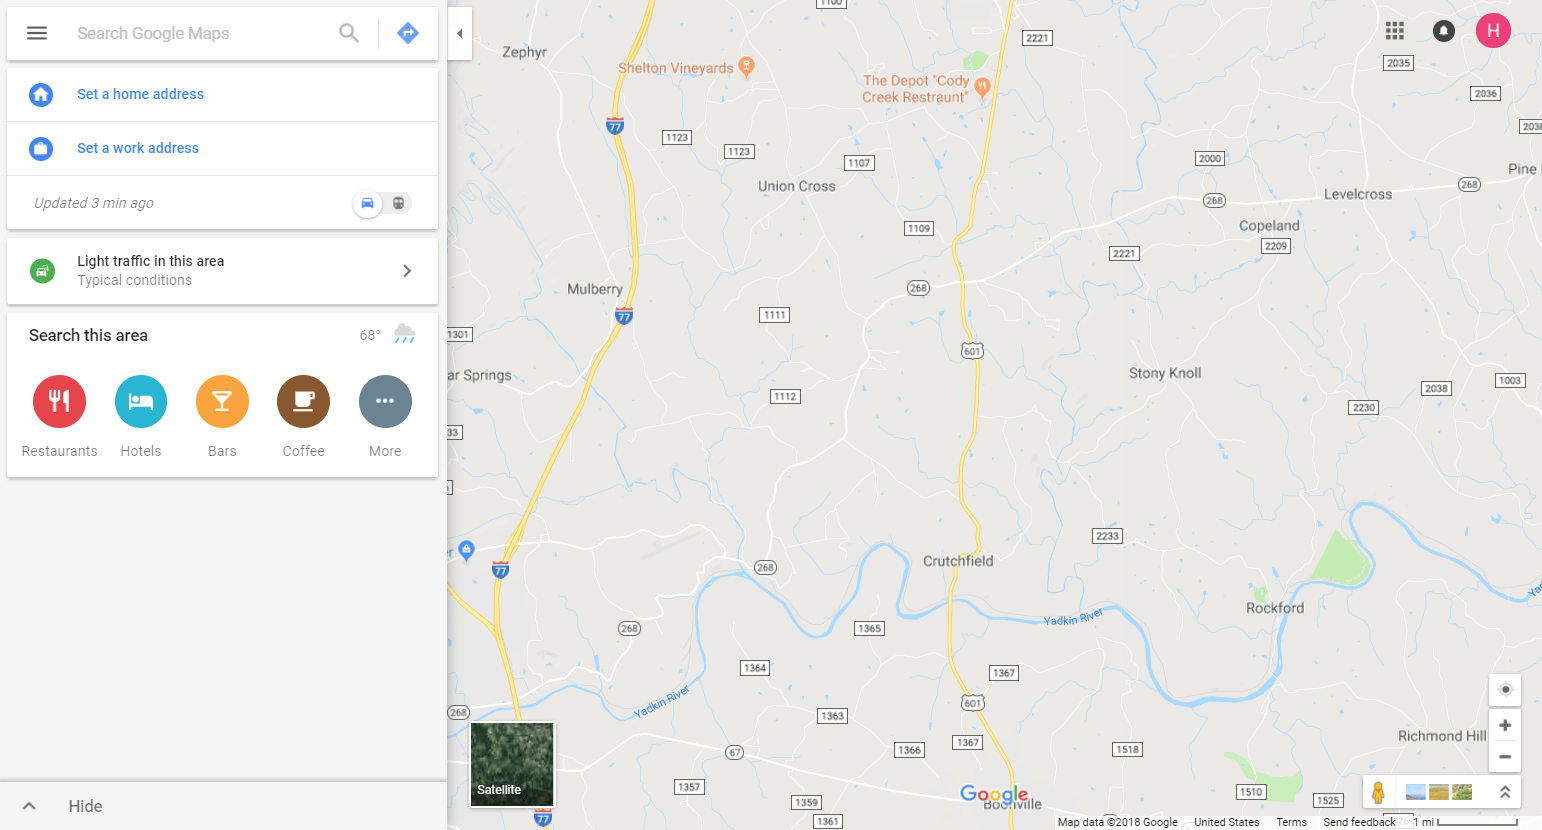 An example of a Google Map.